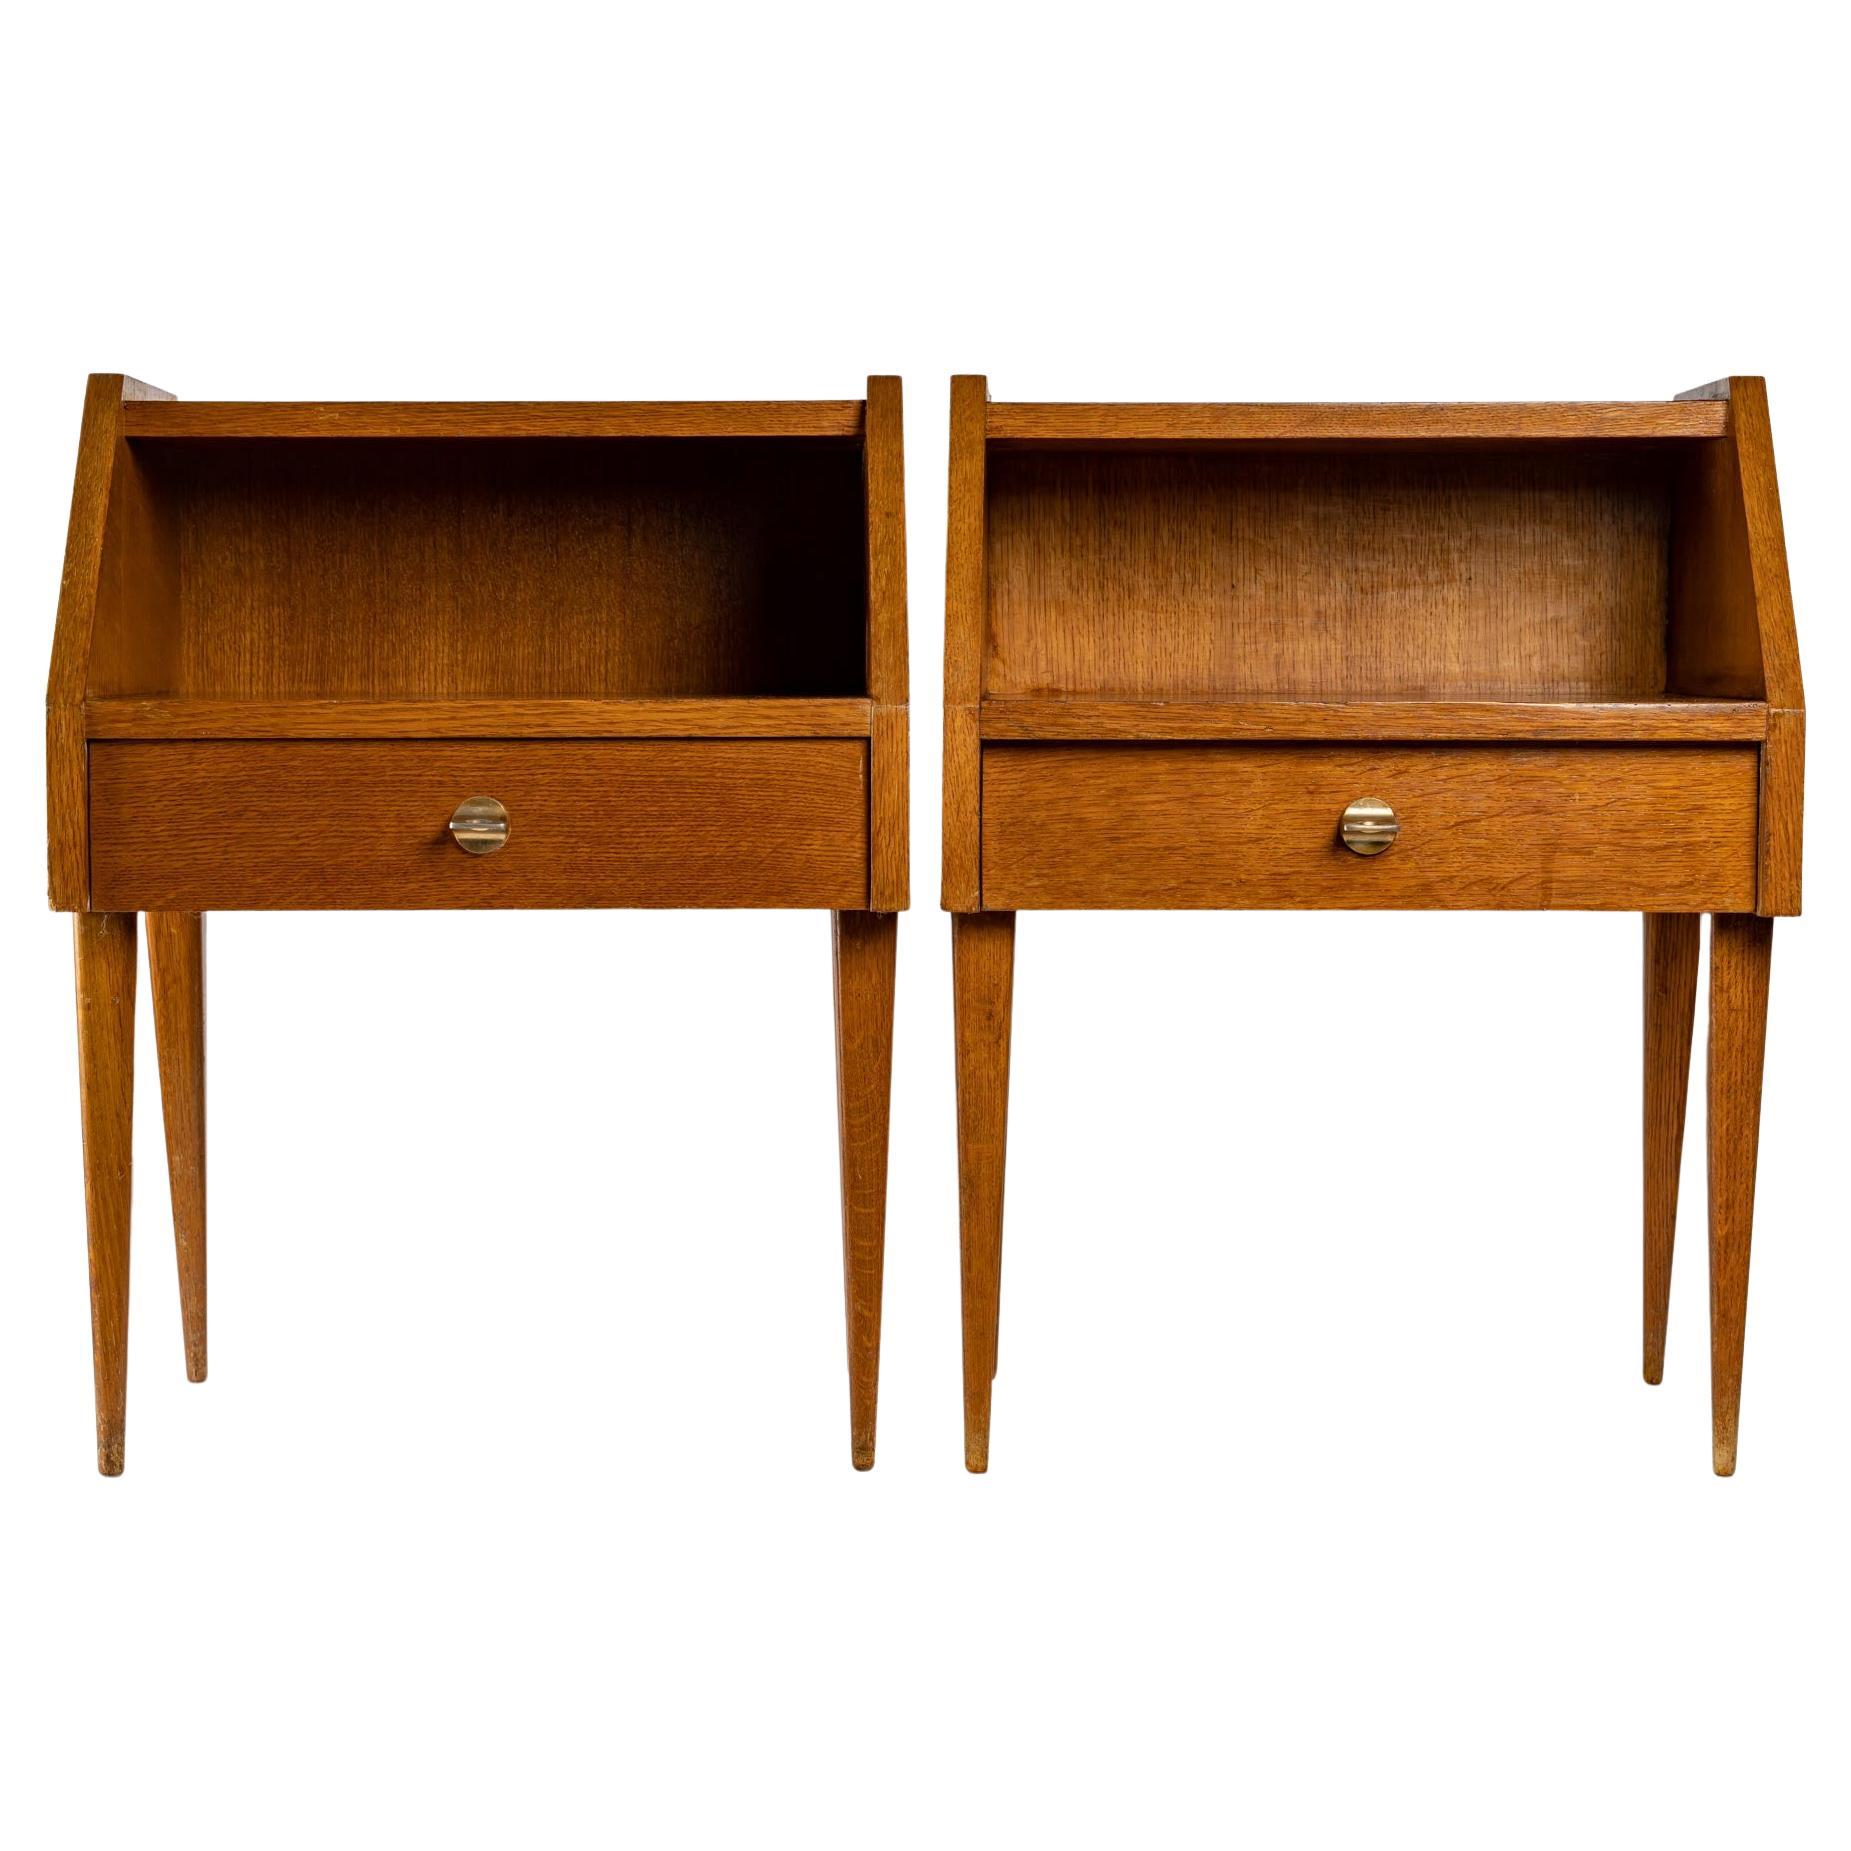 Pair of Bedside Tables, circa 1950-1960